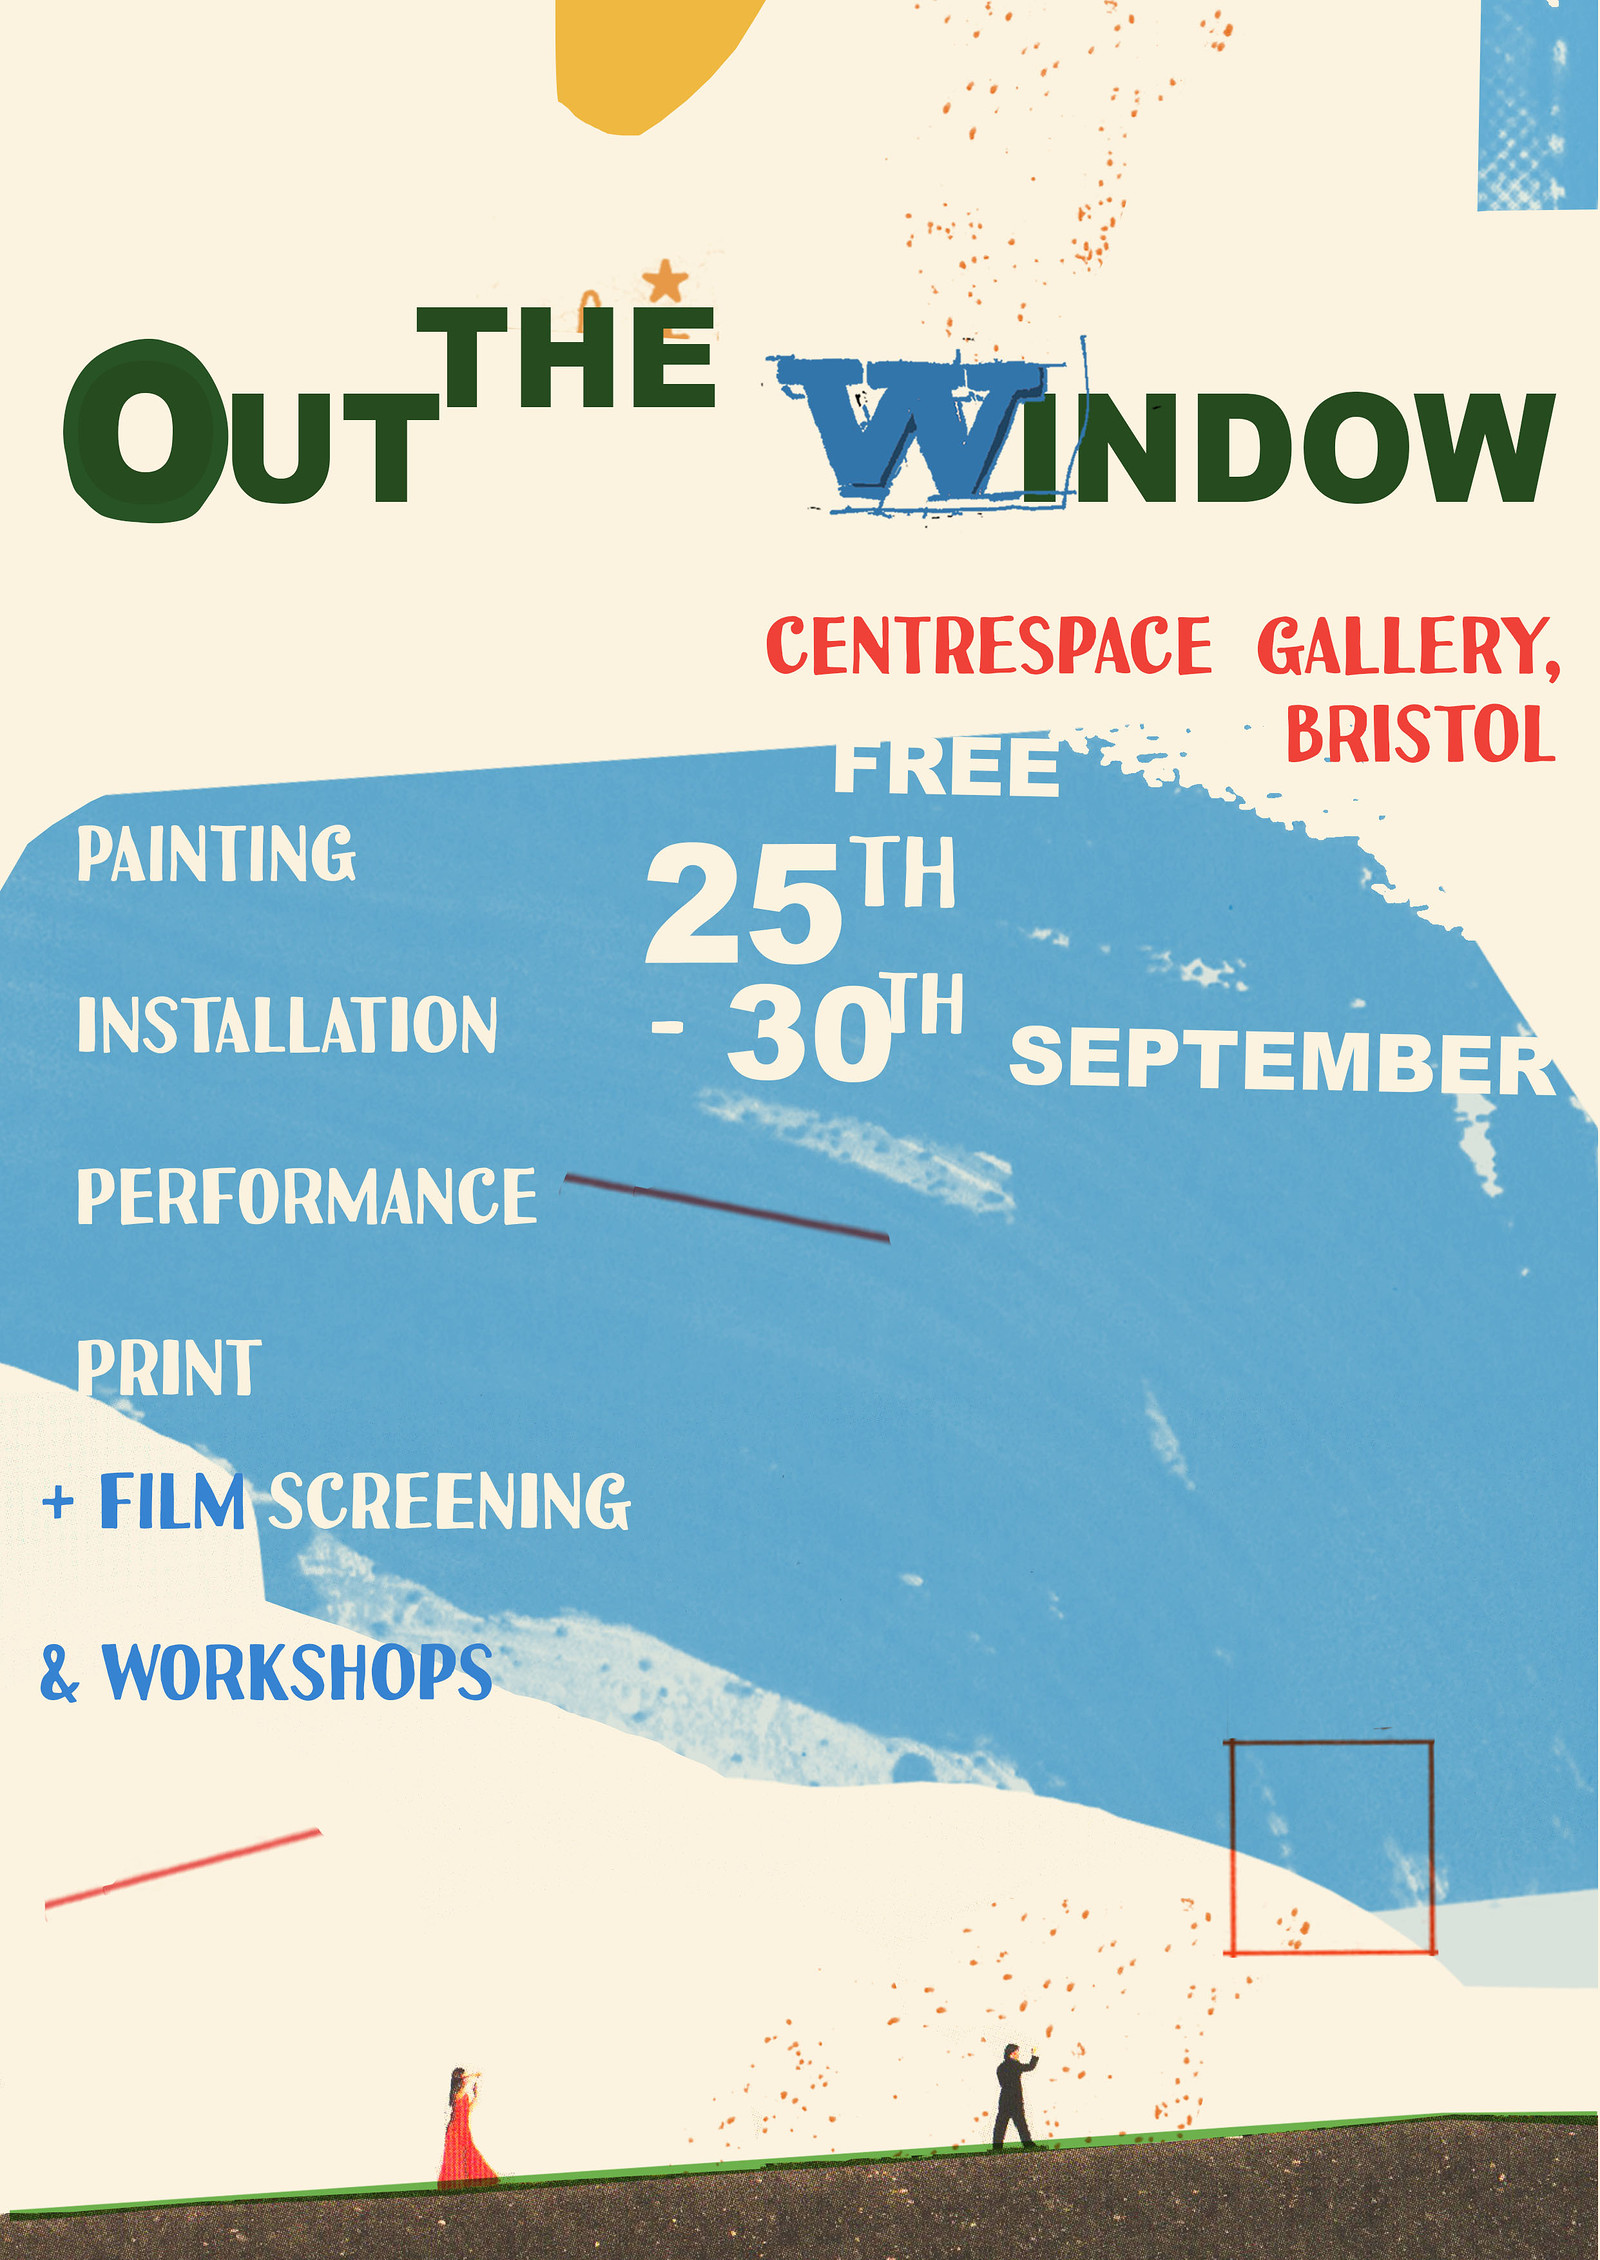 Out the Window at Centrespace Gallery, Bristol